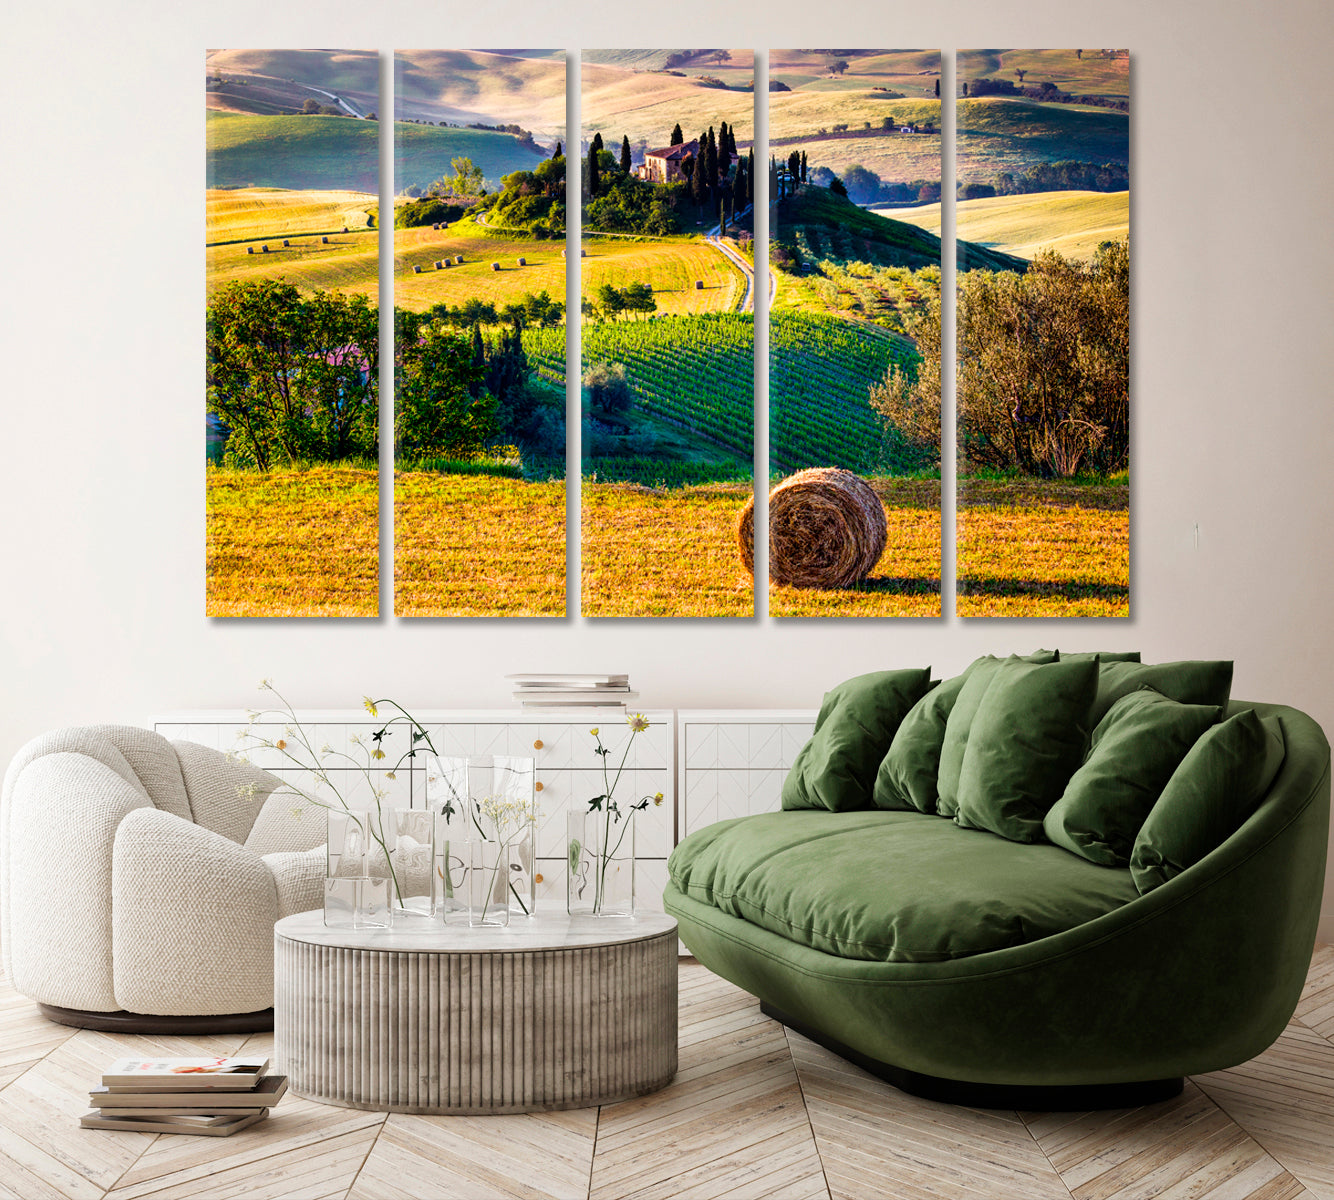 Tuscany Landscape Italy Canvas Print ArtLexy 5 Panels 36"x24" inches 